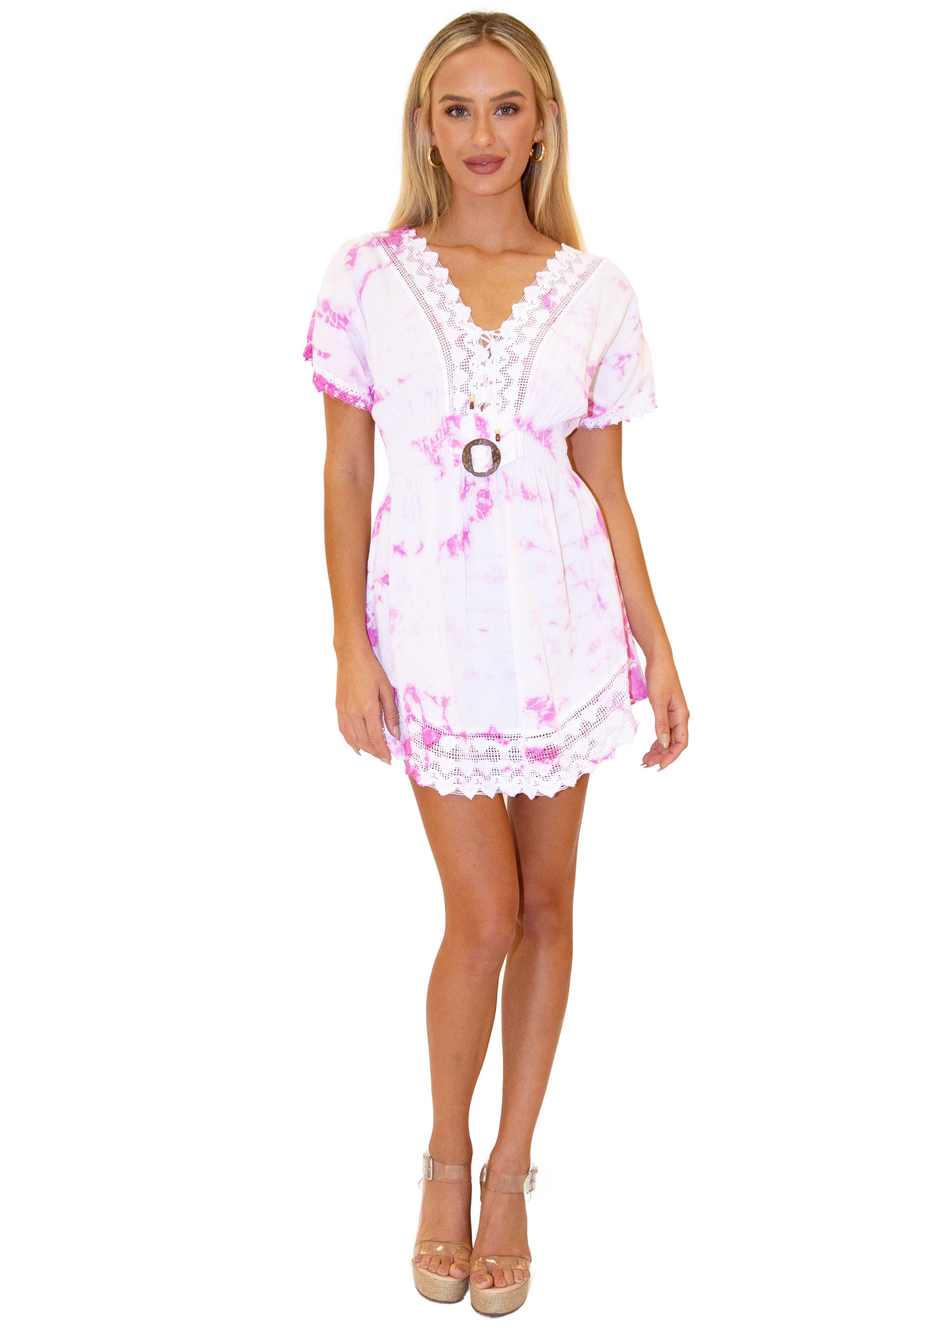 NW1025 - Tie Dye Pink Cotton Cover-Up